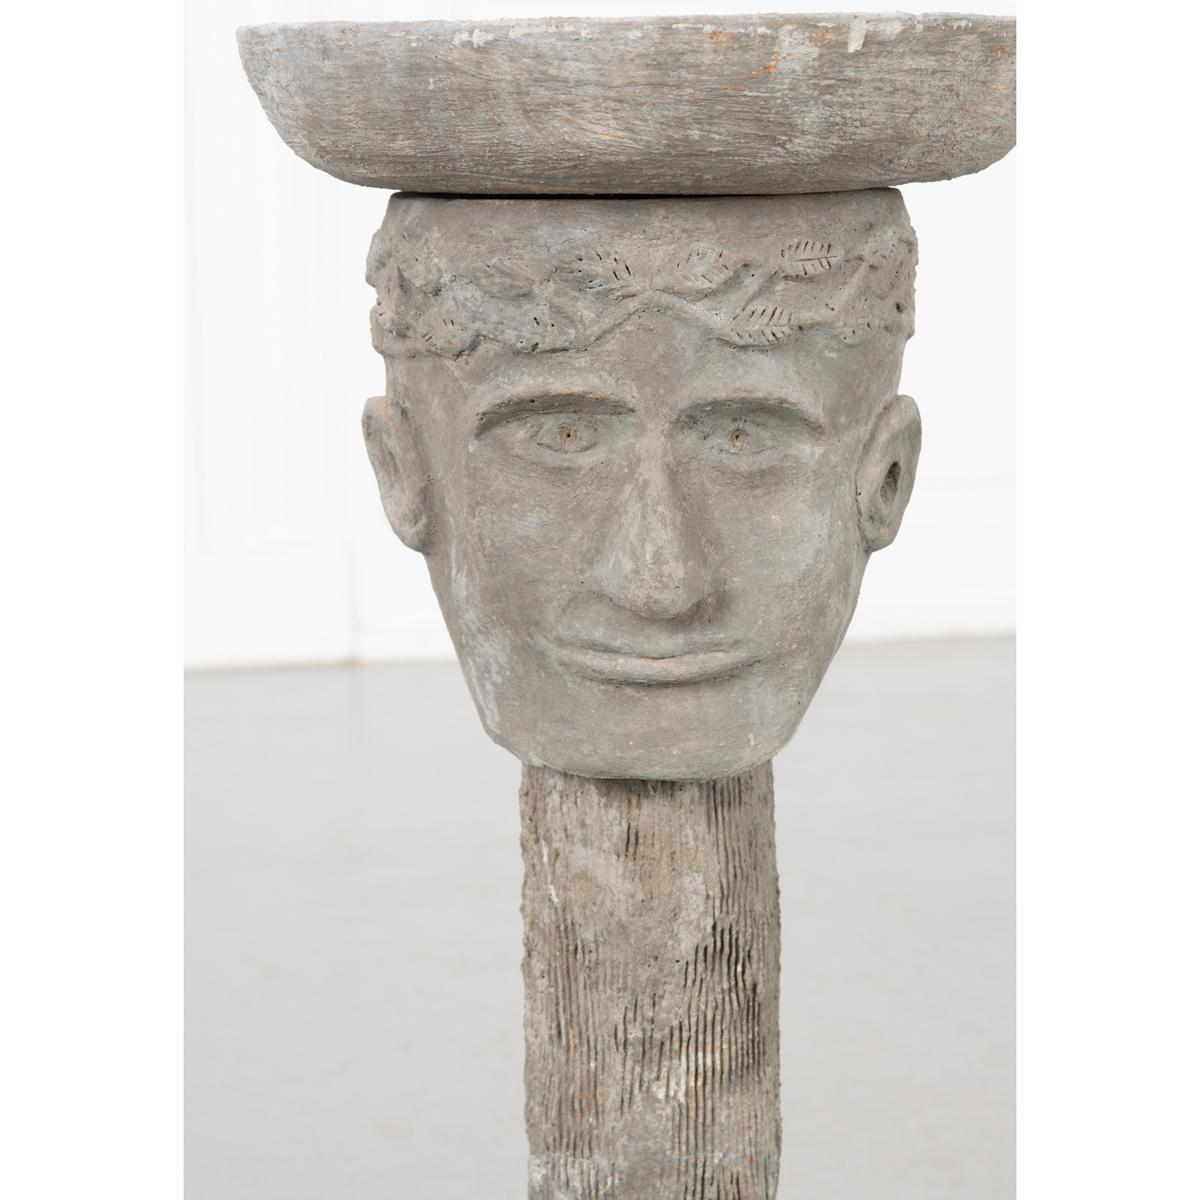 This is a vintage cast playful bird bath or feeder. It features a man’s head and neck with a birdbath sitting on top like a hat. A whimsical item that would be fun in a garden or patio area.
 